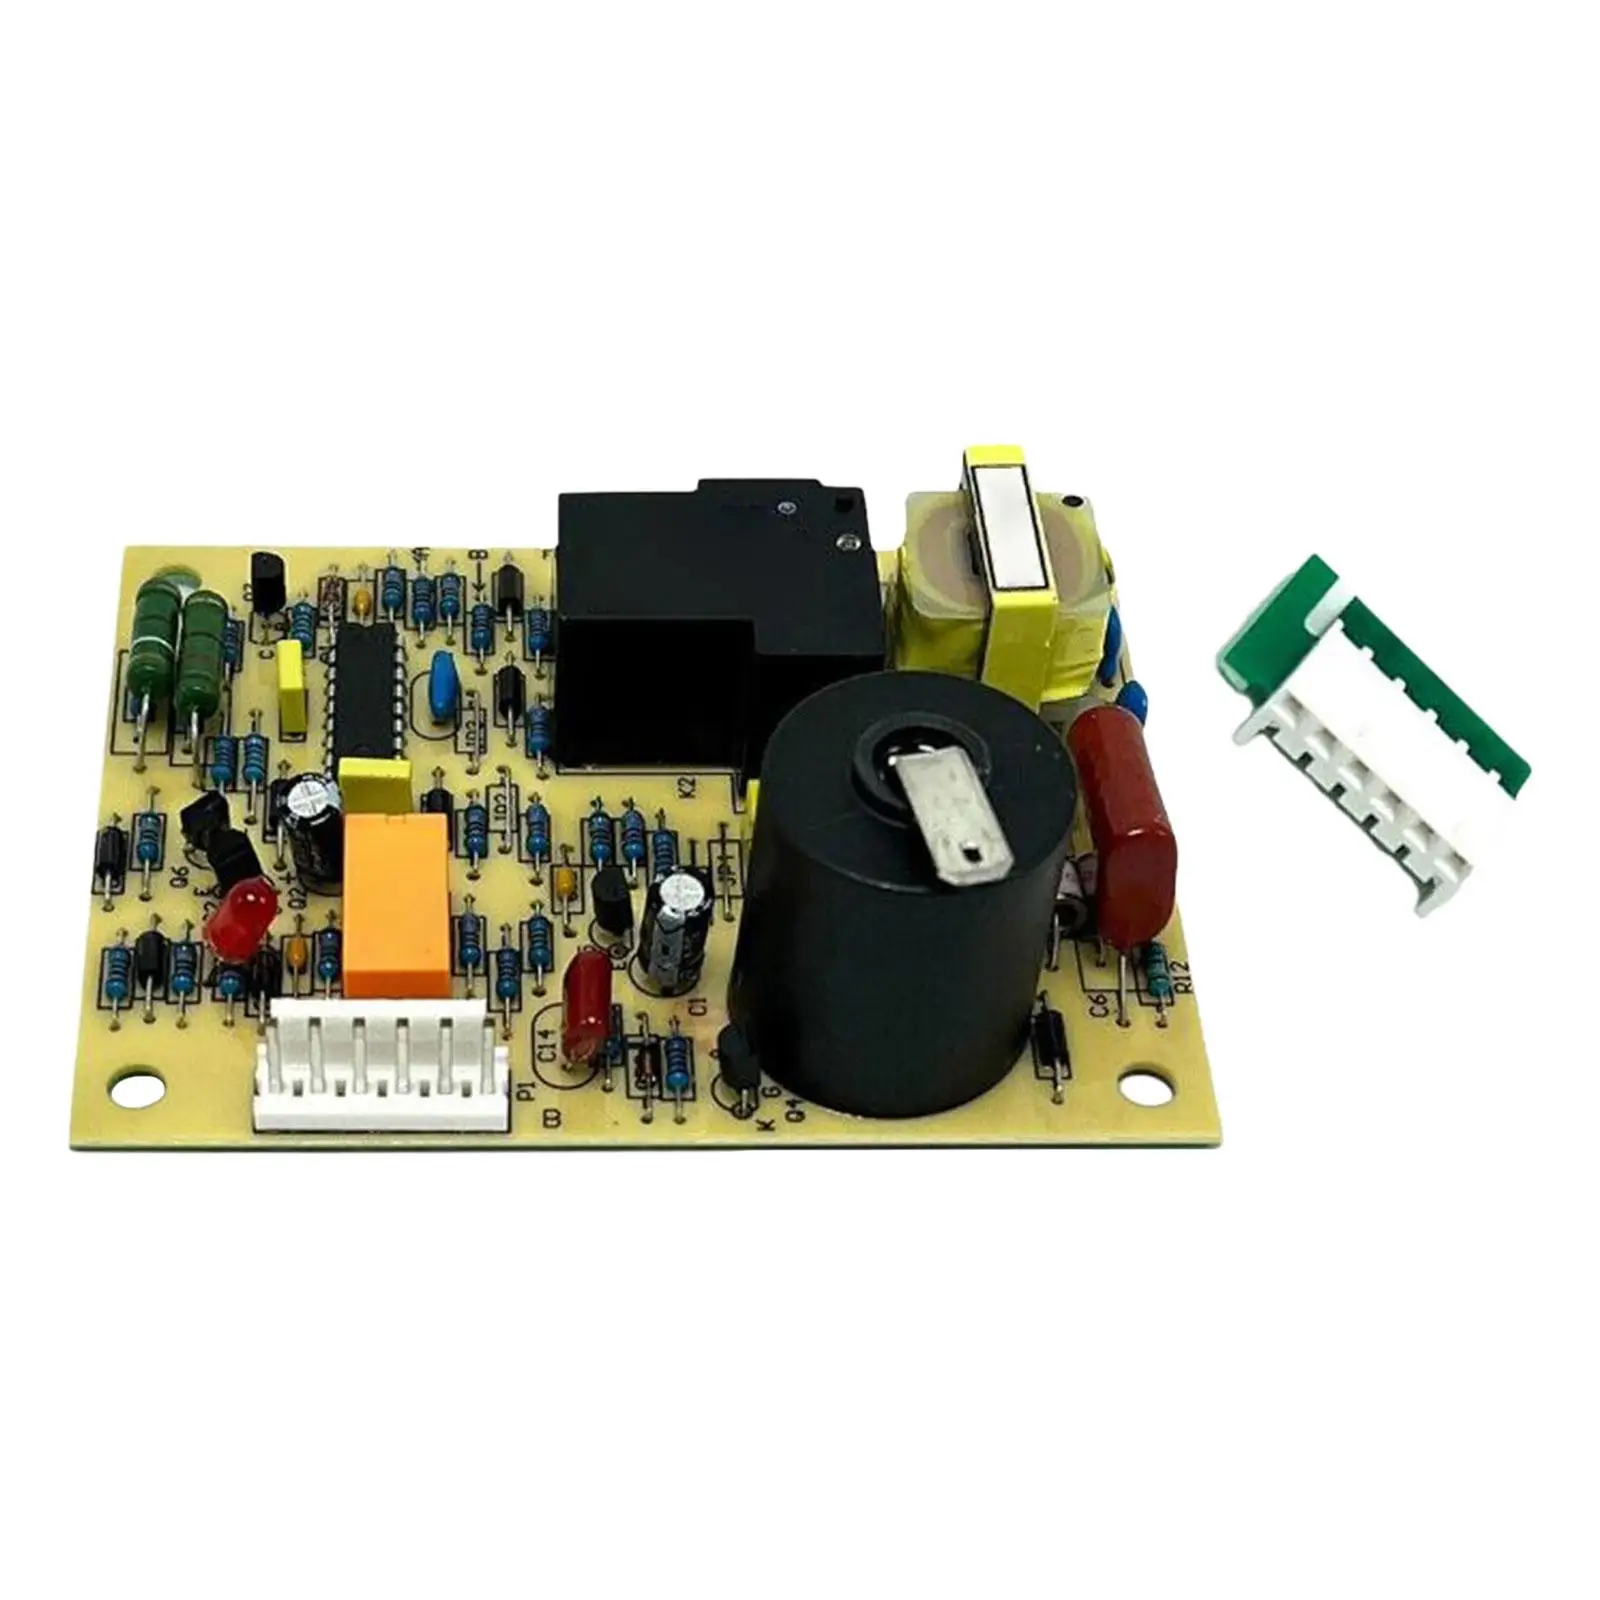 31501 Durable RV Ignition Control Board for 7912-ii Afsd12 85-i Series